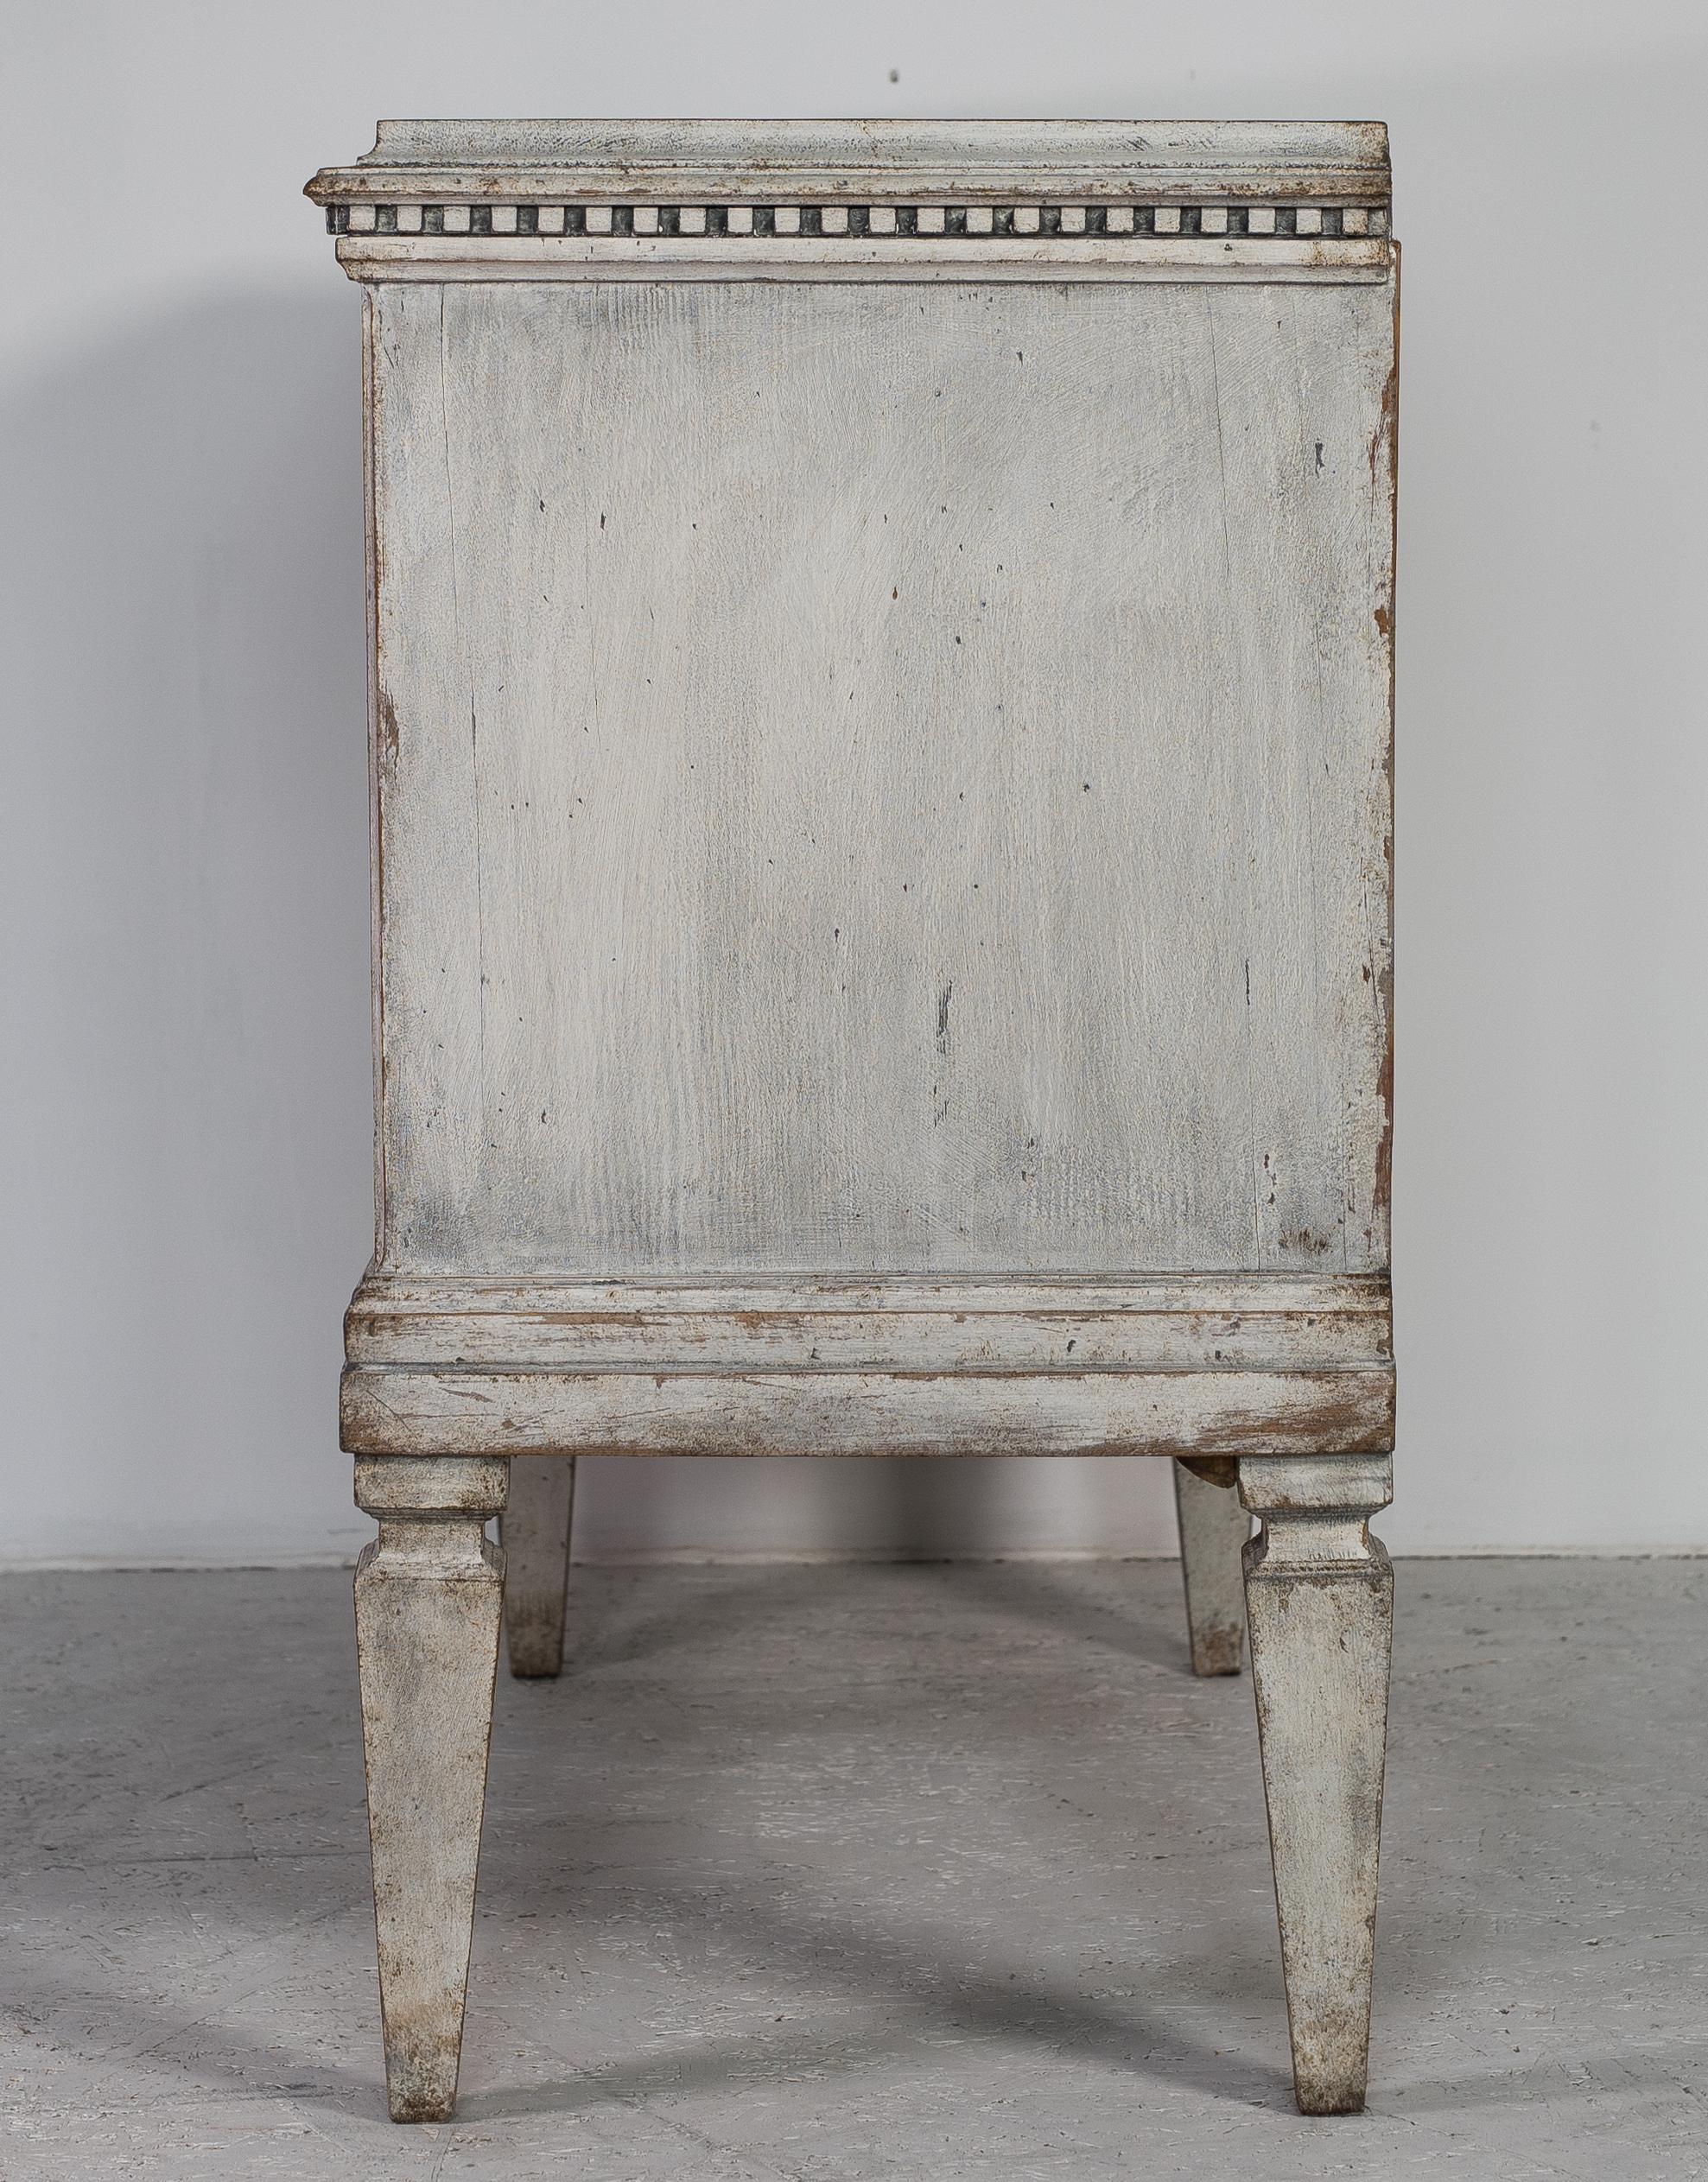 late 1800s circa 1870  antique Swedish Gustavian painted chest of drawers commode with 9 mini drawers and central cupboard with lovely detailing and a fantastic patina

Side drawers: W: 29,5 cm (11,5''), H: 7,5 cm (2,9''), D: 33,7 cm (13,3'')
Middle